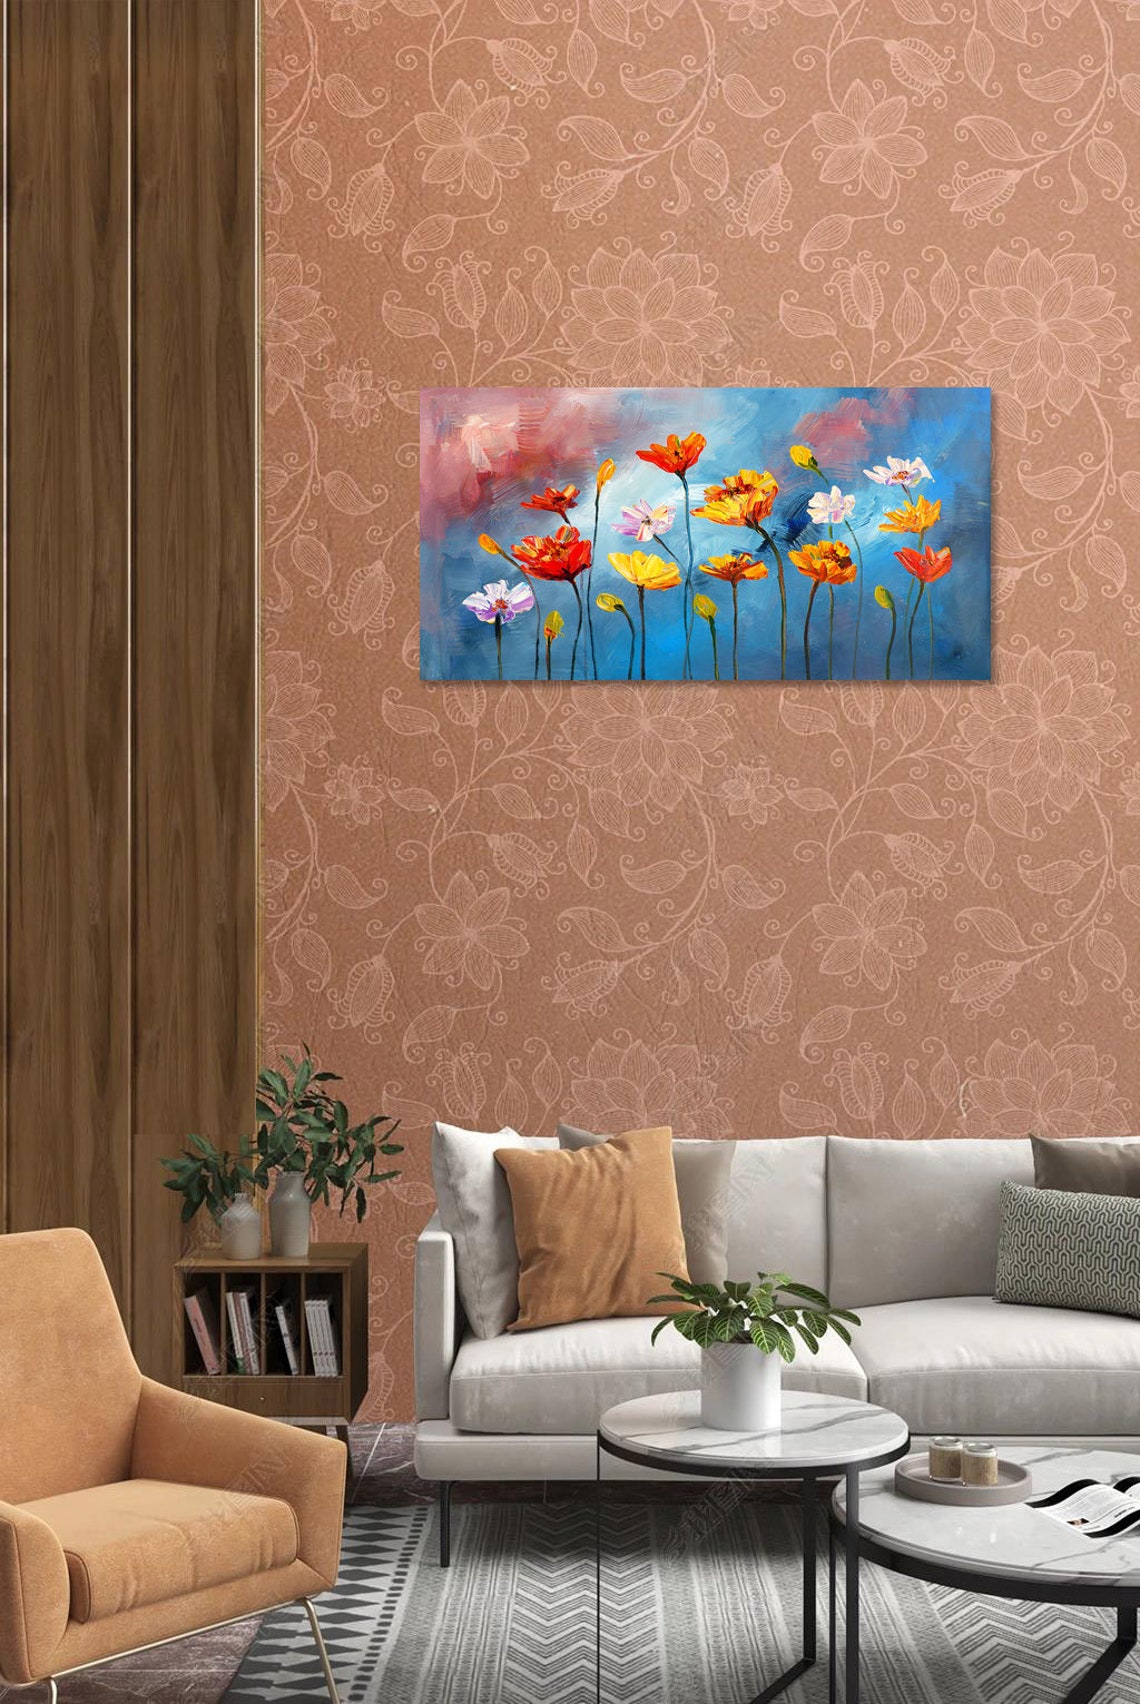 Hand Painted Garden Poppies Flower Painting on Canvas Modern | Etsy